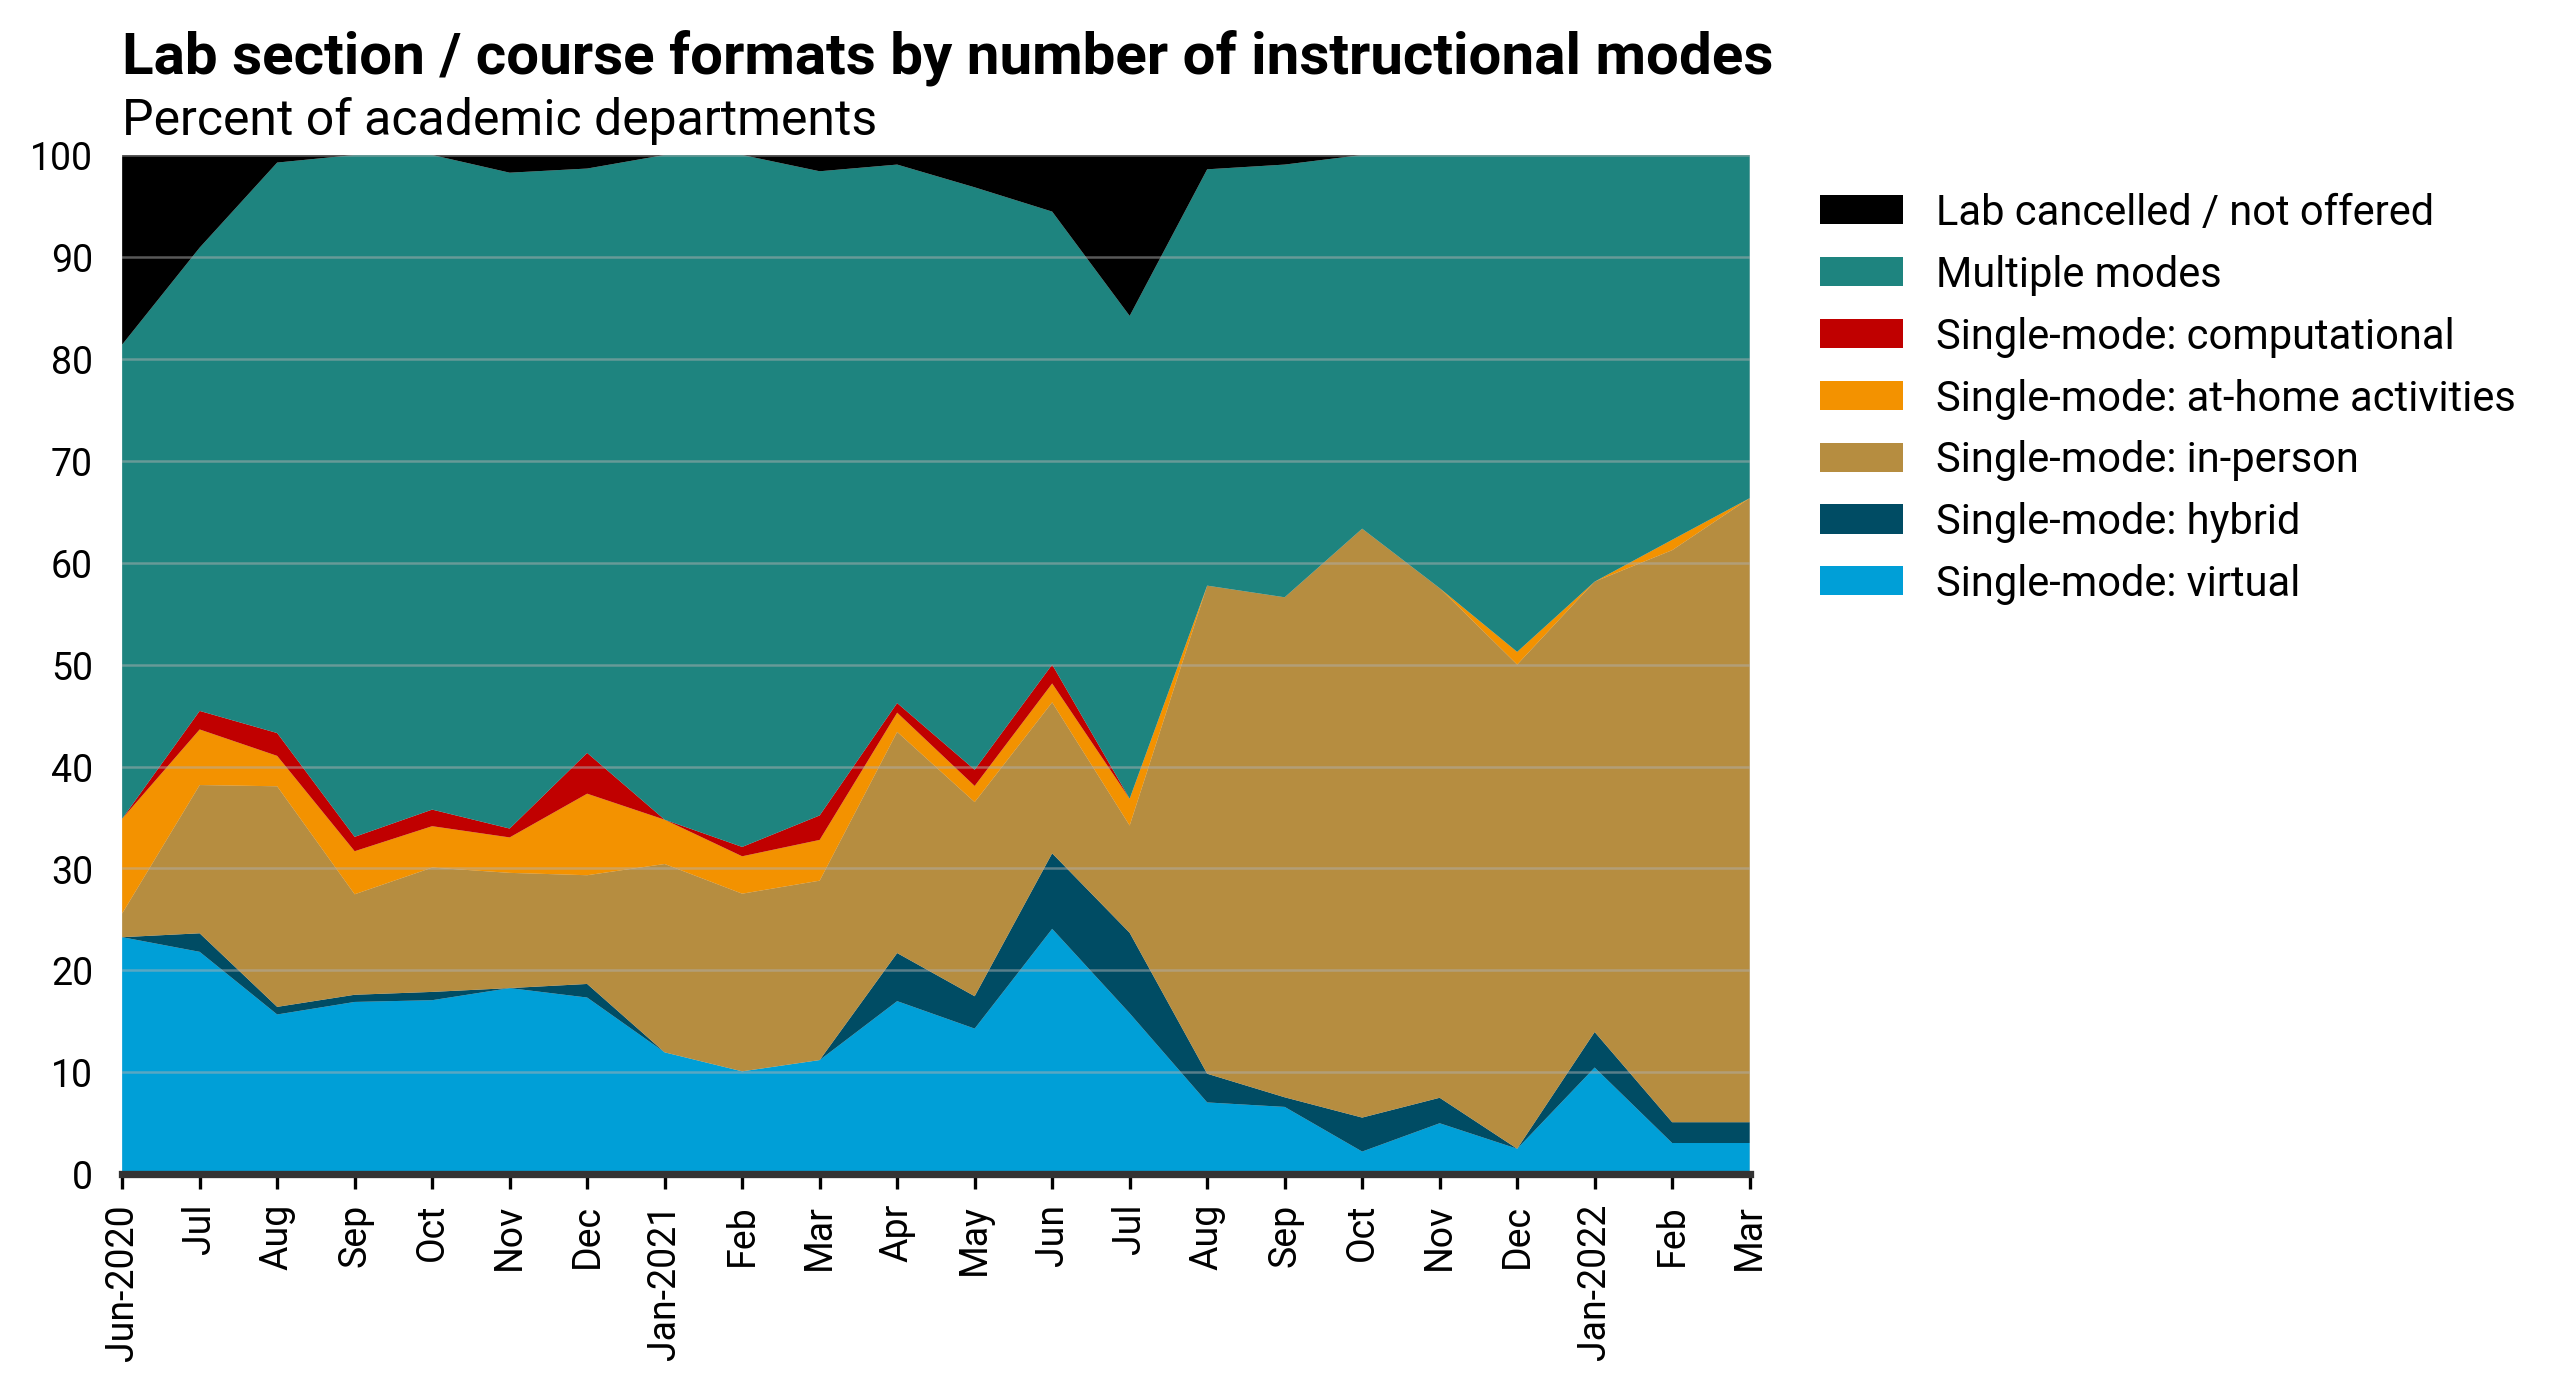 DB_2022-004 chart 04: Lab section / course formats by number of instructional modes (Credit: AGI; data from AGI&#039;s Geoscience COVID-19 Survey)